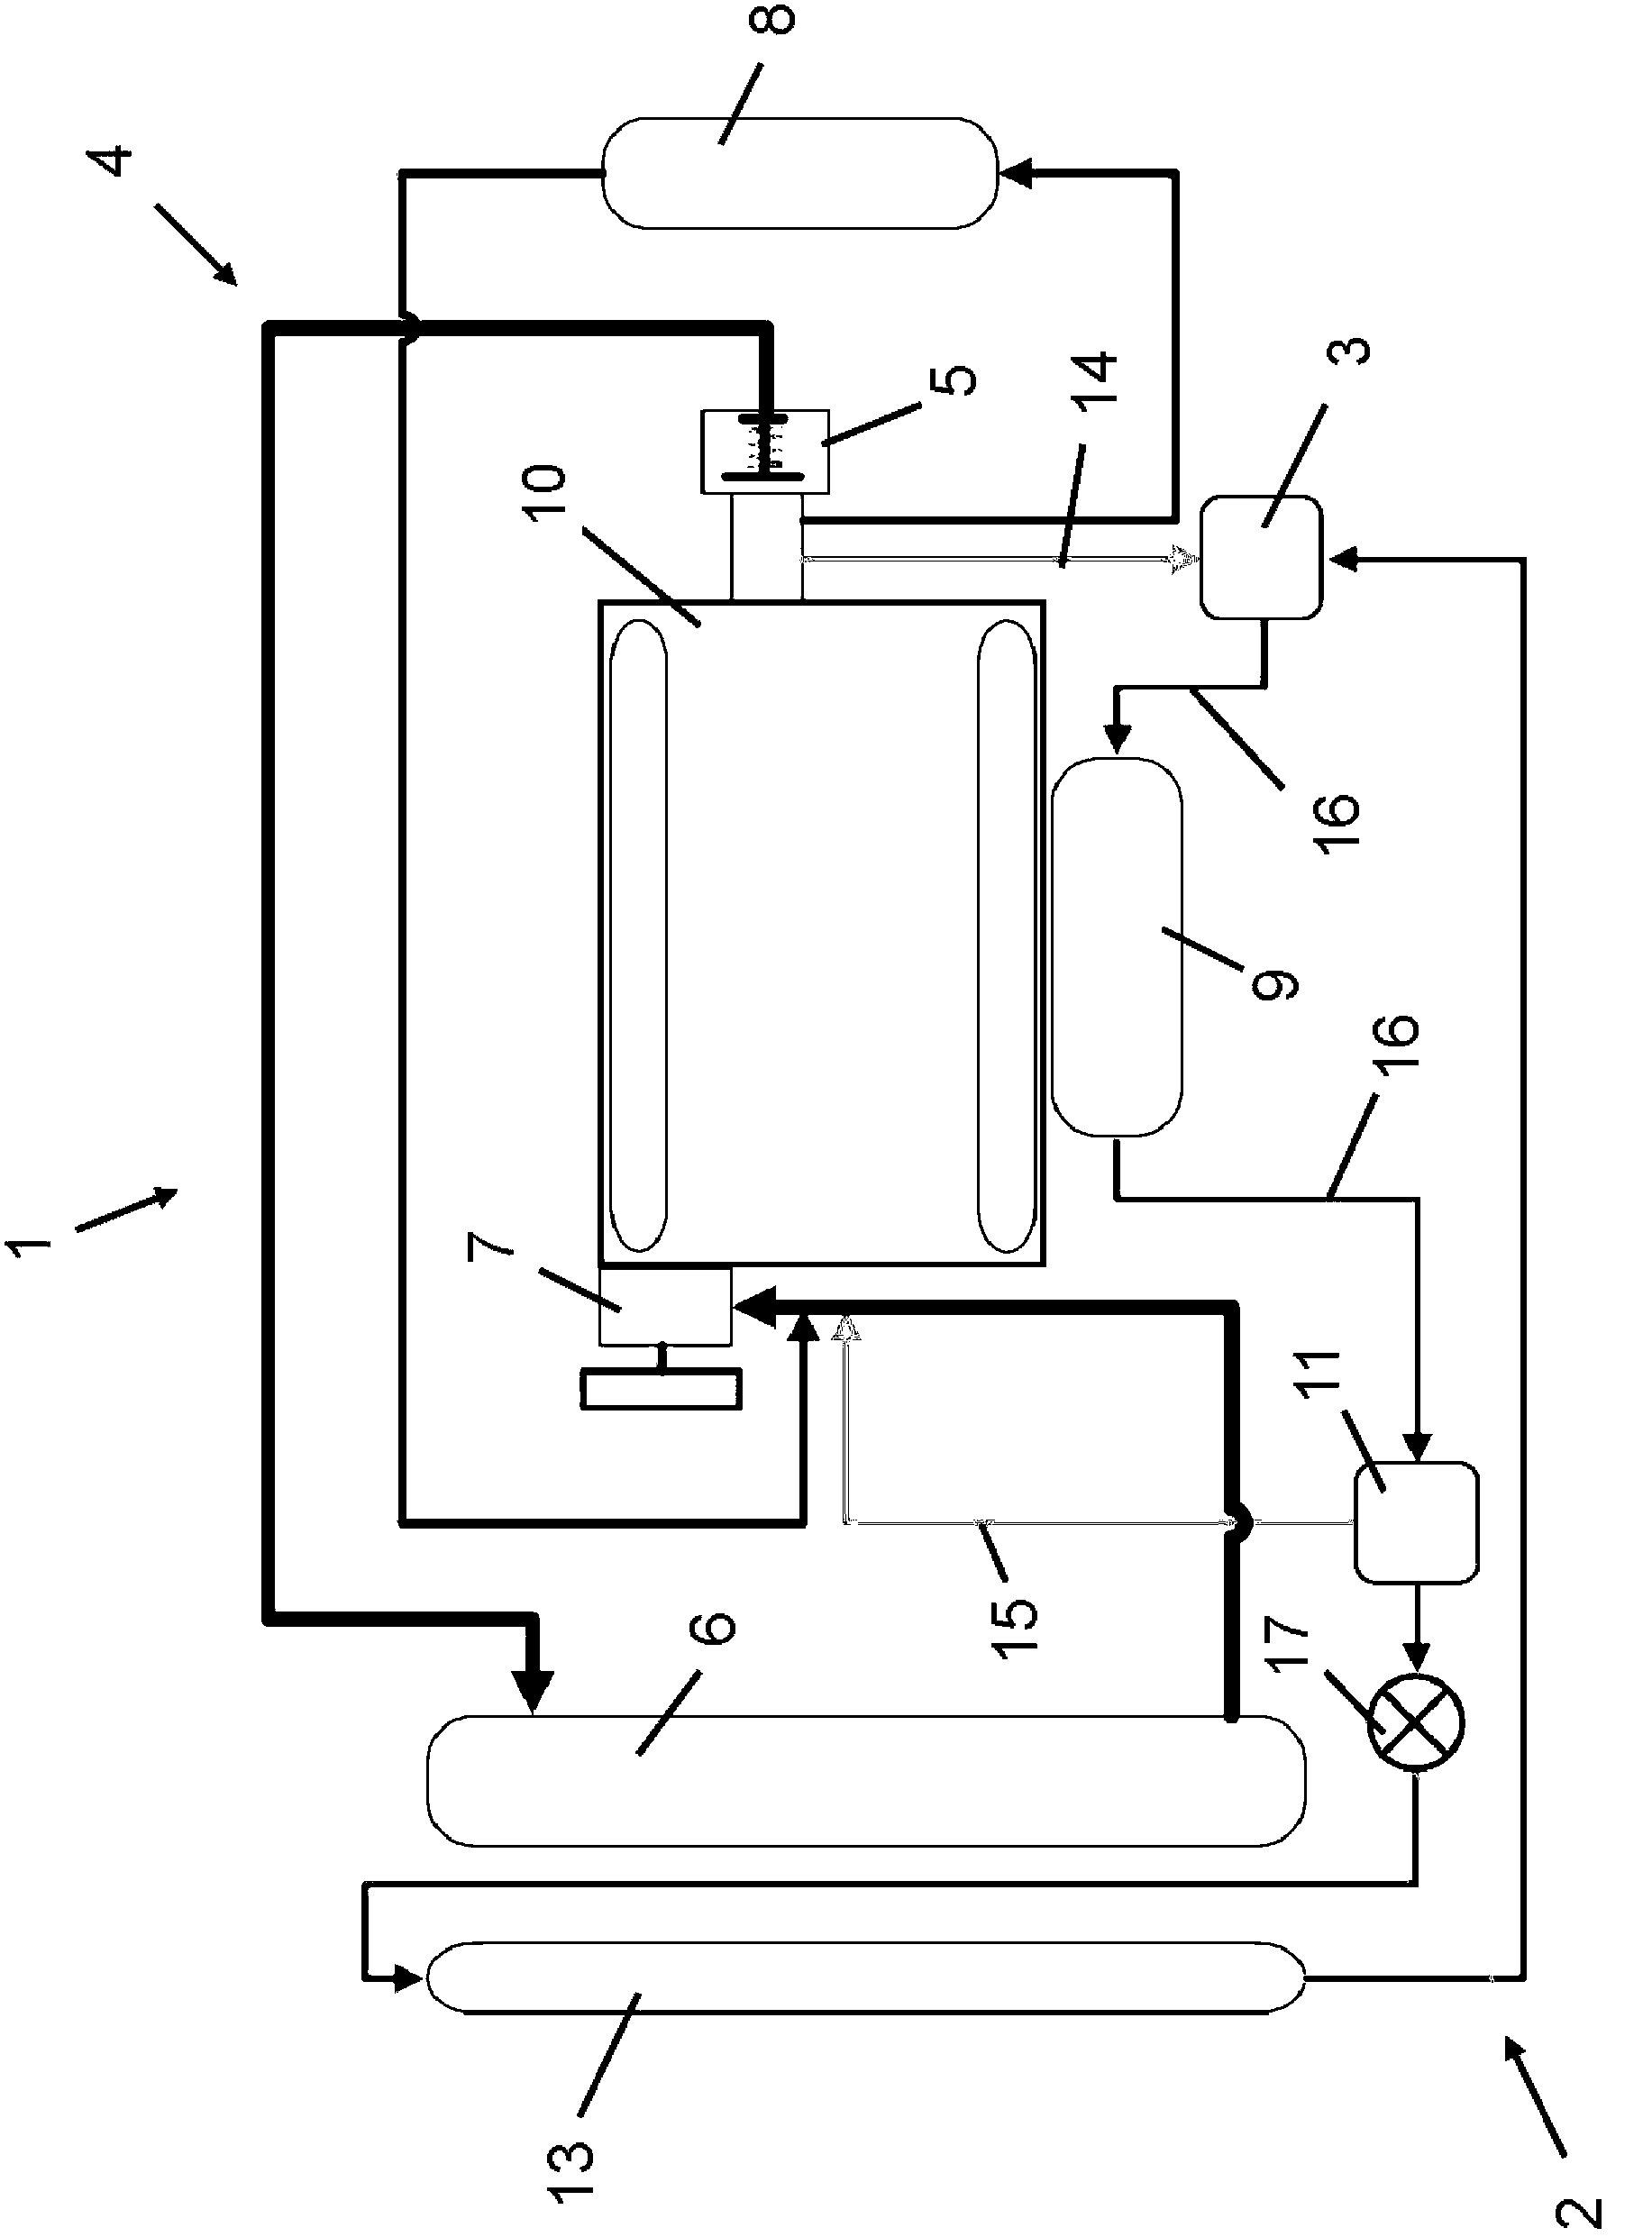 Cooling arrangement for a chargeable internal combustion engine